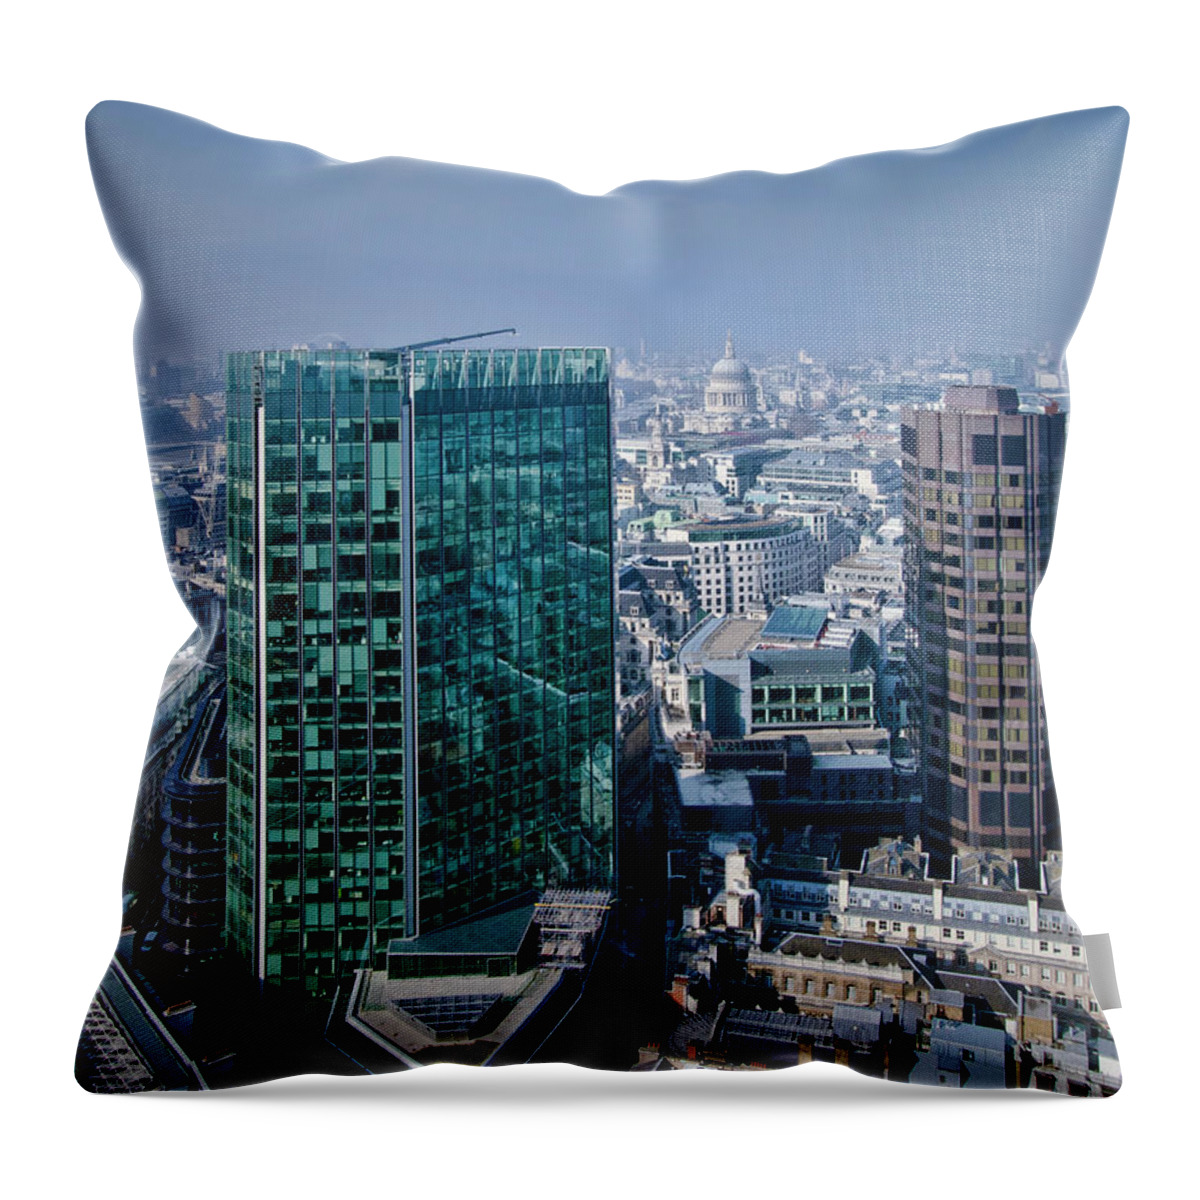 Outdoors Throw Pillow featuring the photograph City Of London by David Norfolk Arps Artist/photographer